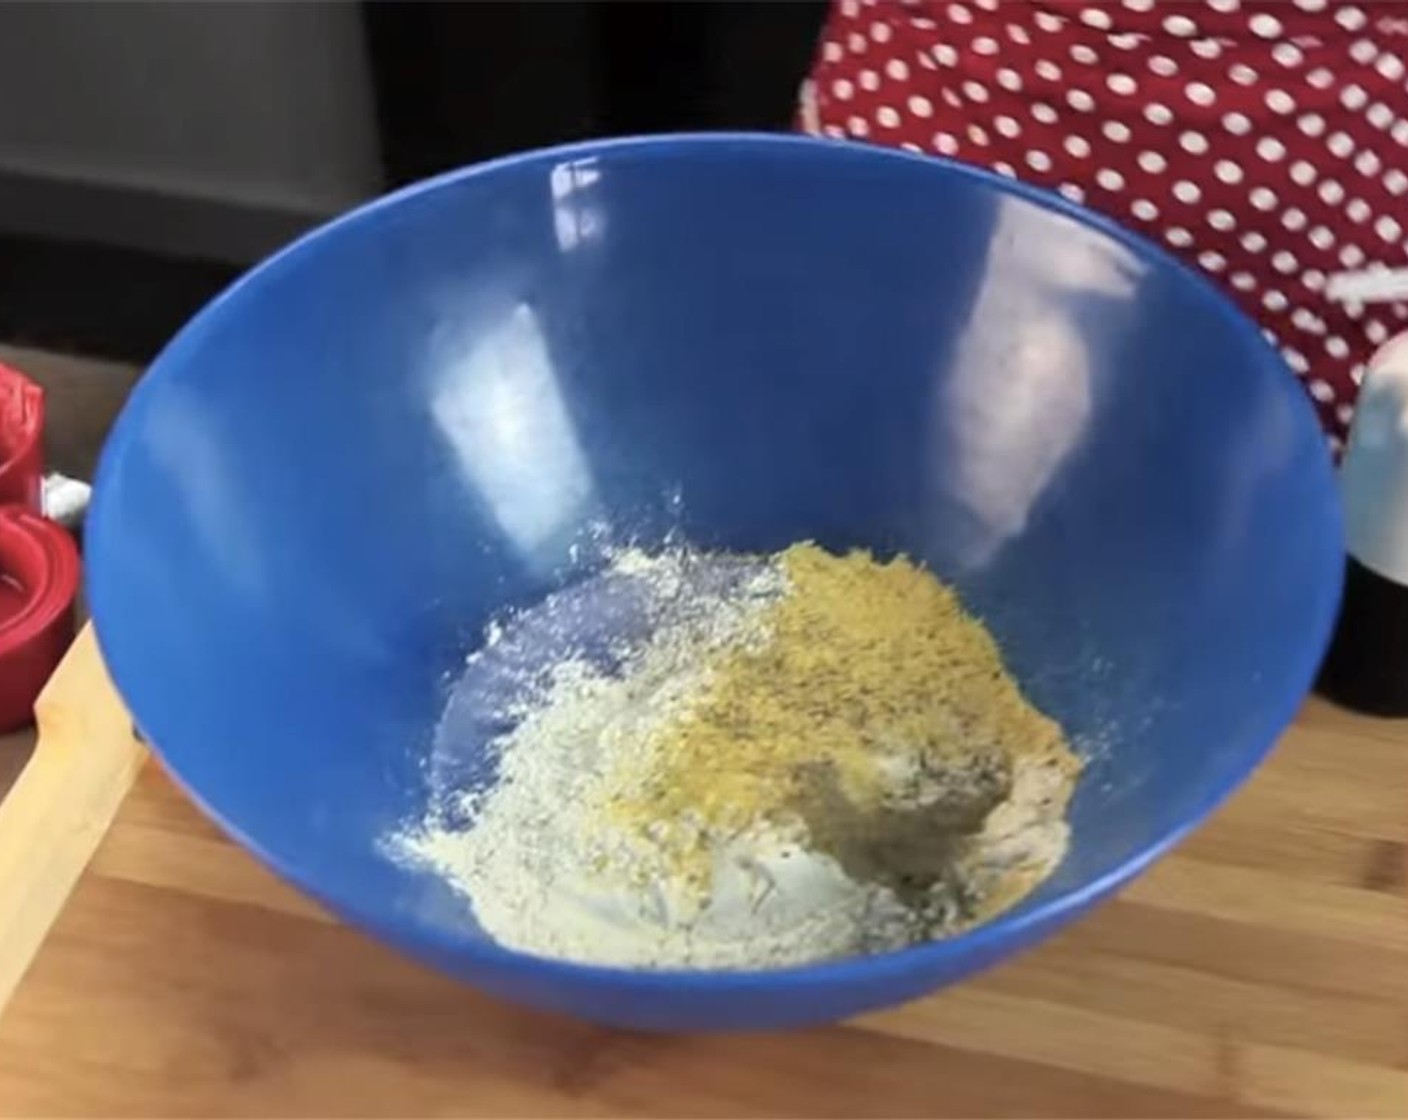 step 1 In a mixing bowl, mix together Vital Wheat Gluten (1 cup), Nutritional Yeast (2 Tbsp), Onion Powder (1/2 Tbsp), Poultry Seasoning (1/2 tsp).